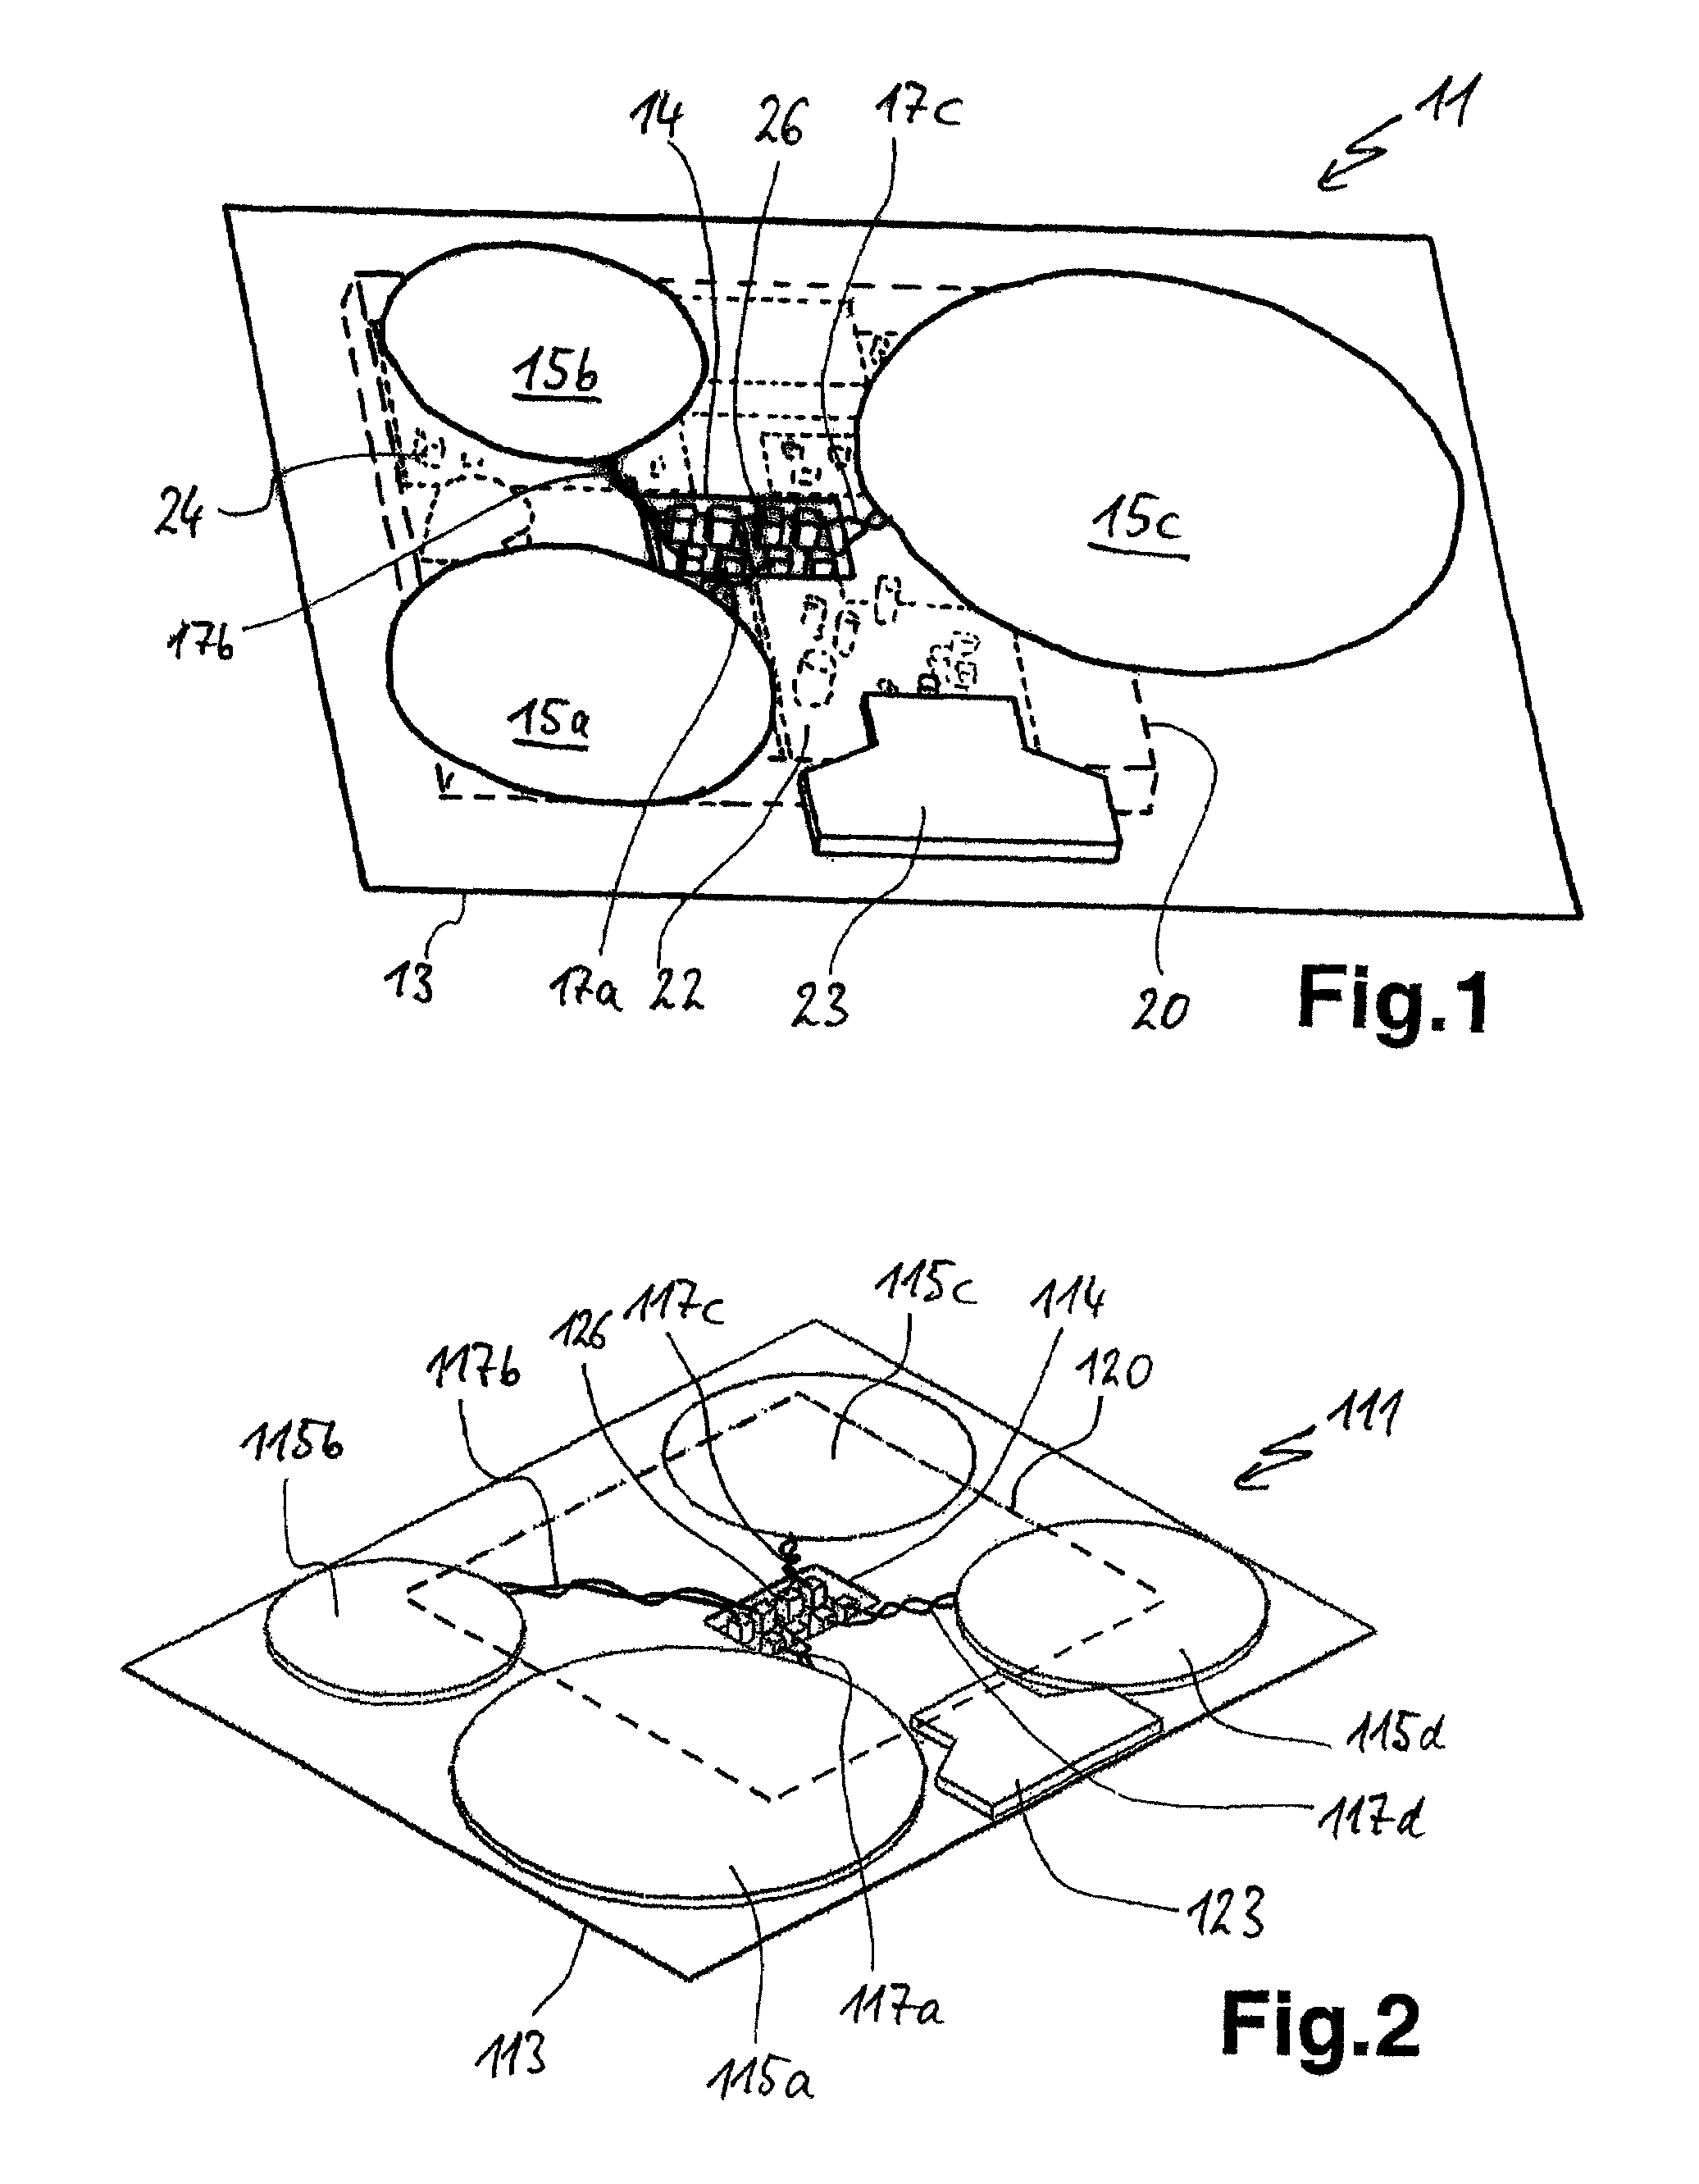 Method for the construction of an induction hob, as well as an induction hob